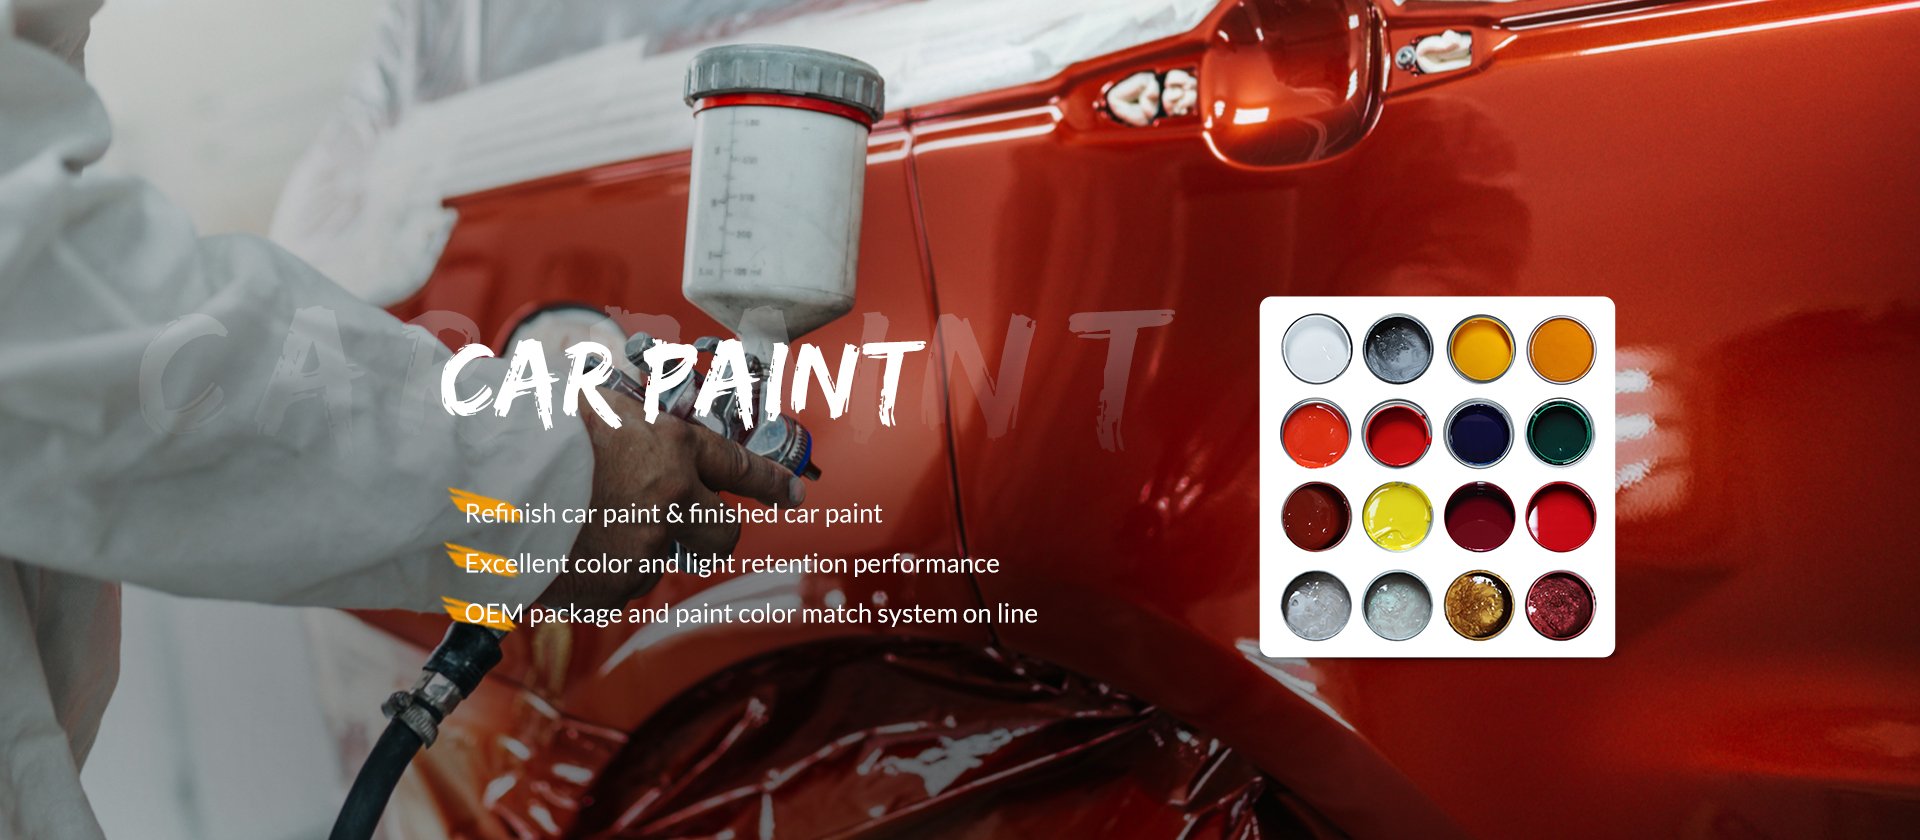 Garage Floor Epoxy, Intumescent Coating, Designer Wall Paint - Forest paint